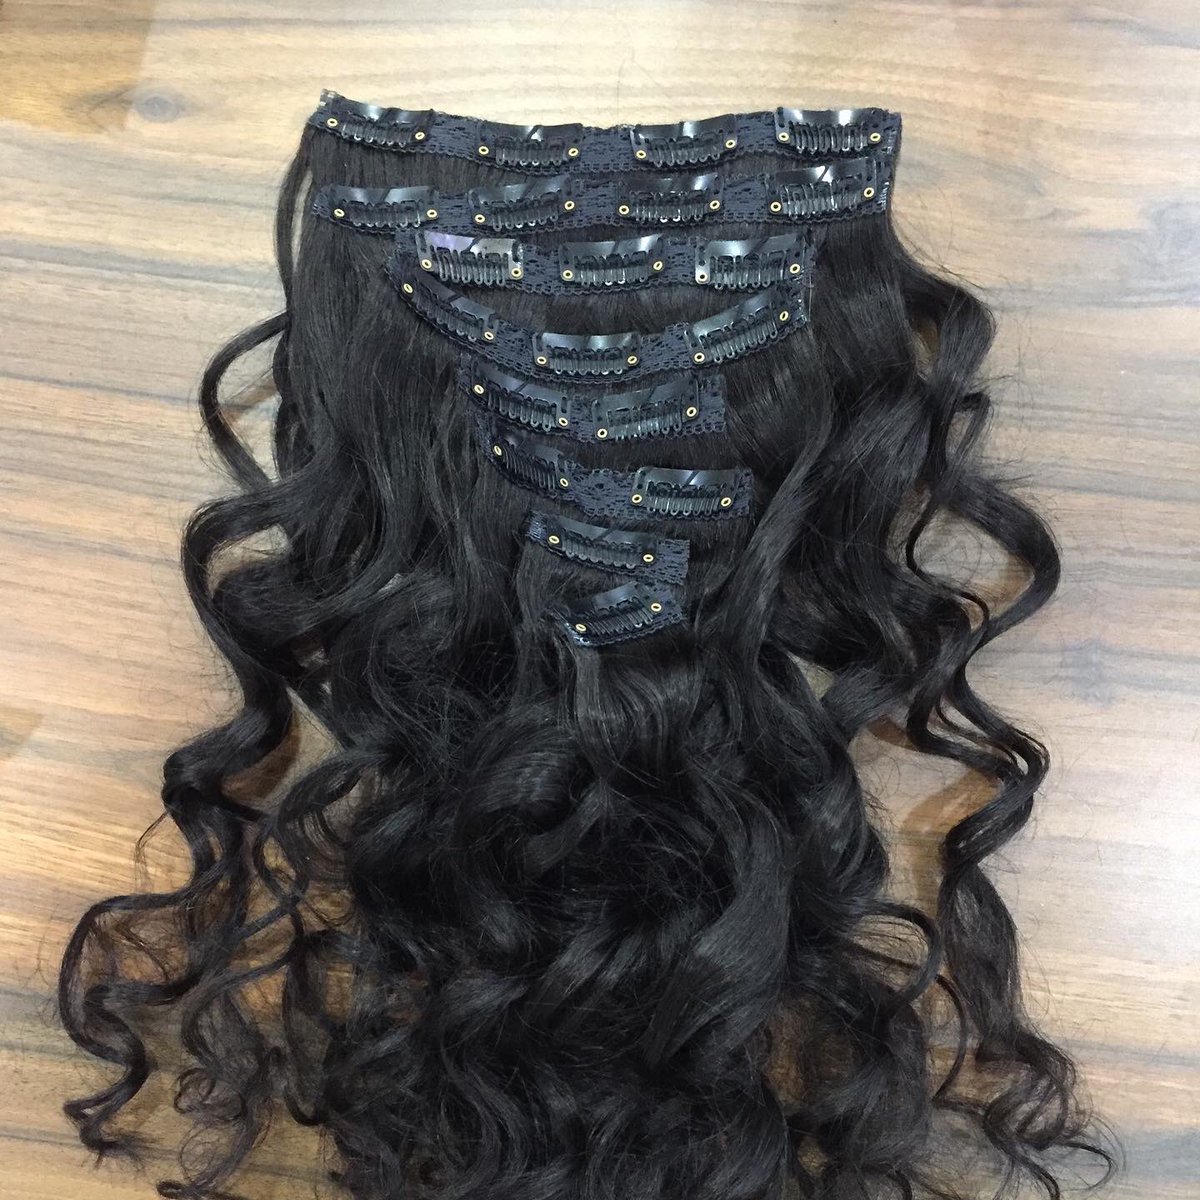 Clip in hair extensions🌹🌹
Save $10 code ' TW10'
Link here : lavyhair.com/16-inch-30-inc…

#clipinhair #clipin #straight #curly #lavyhair